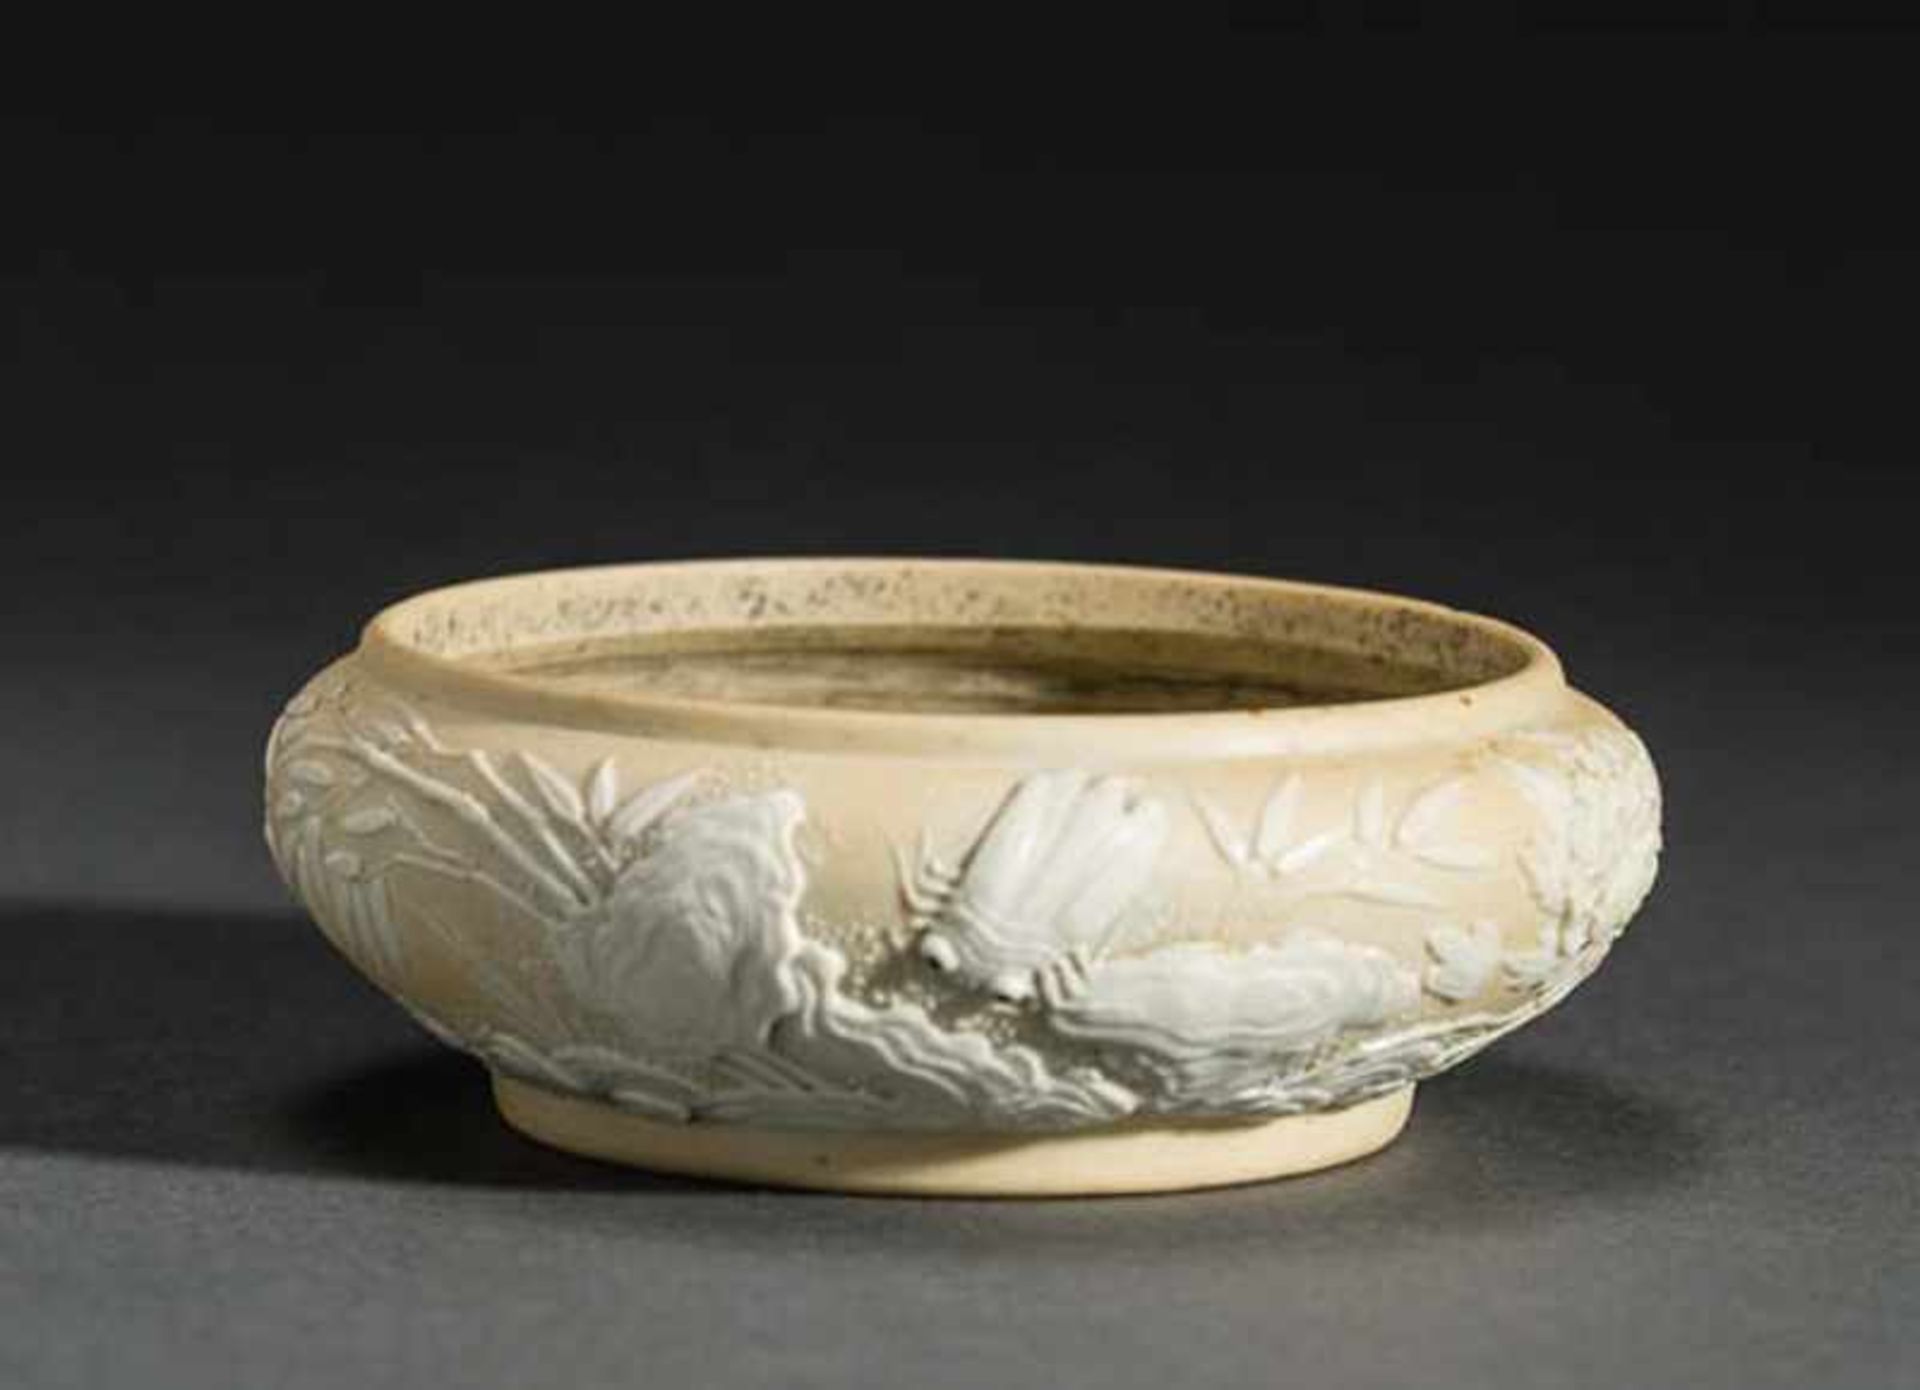 BOWL FEATURING BLOSSOMS, BEETLES, FISH Unglazed porcelain with fused decoration. China, Qing dynasty